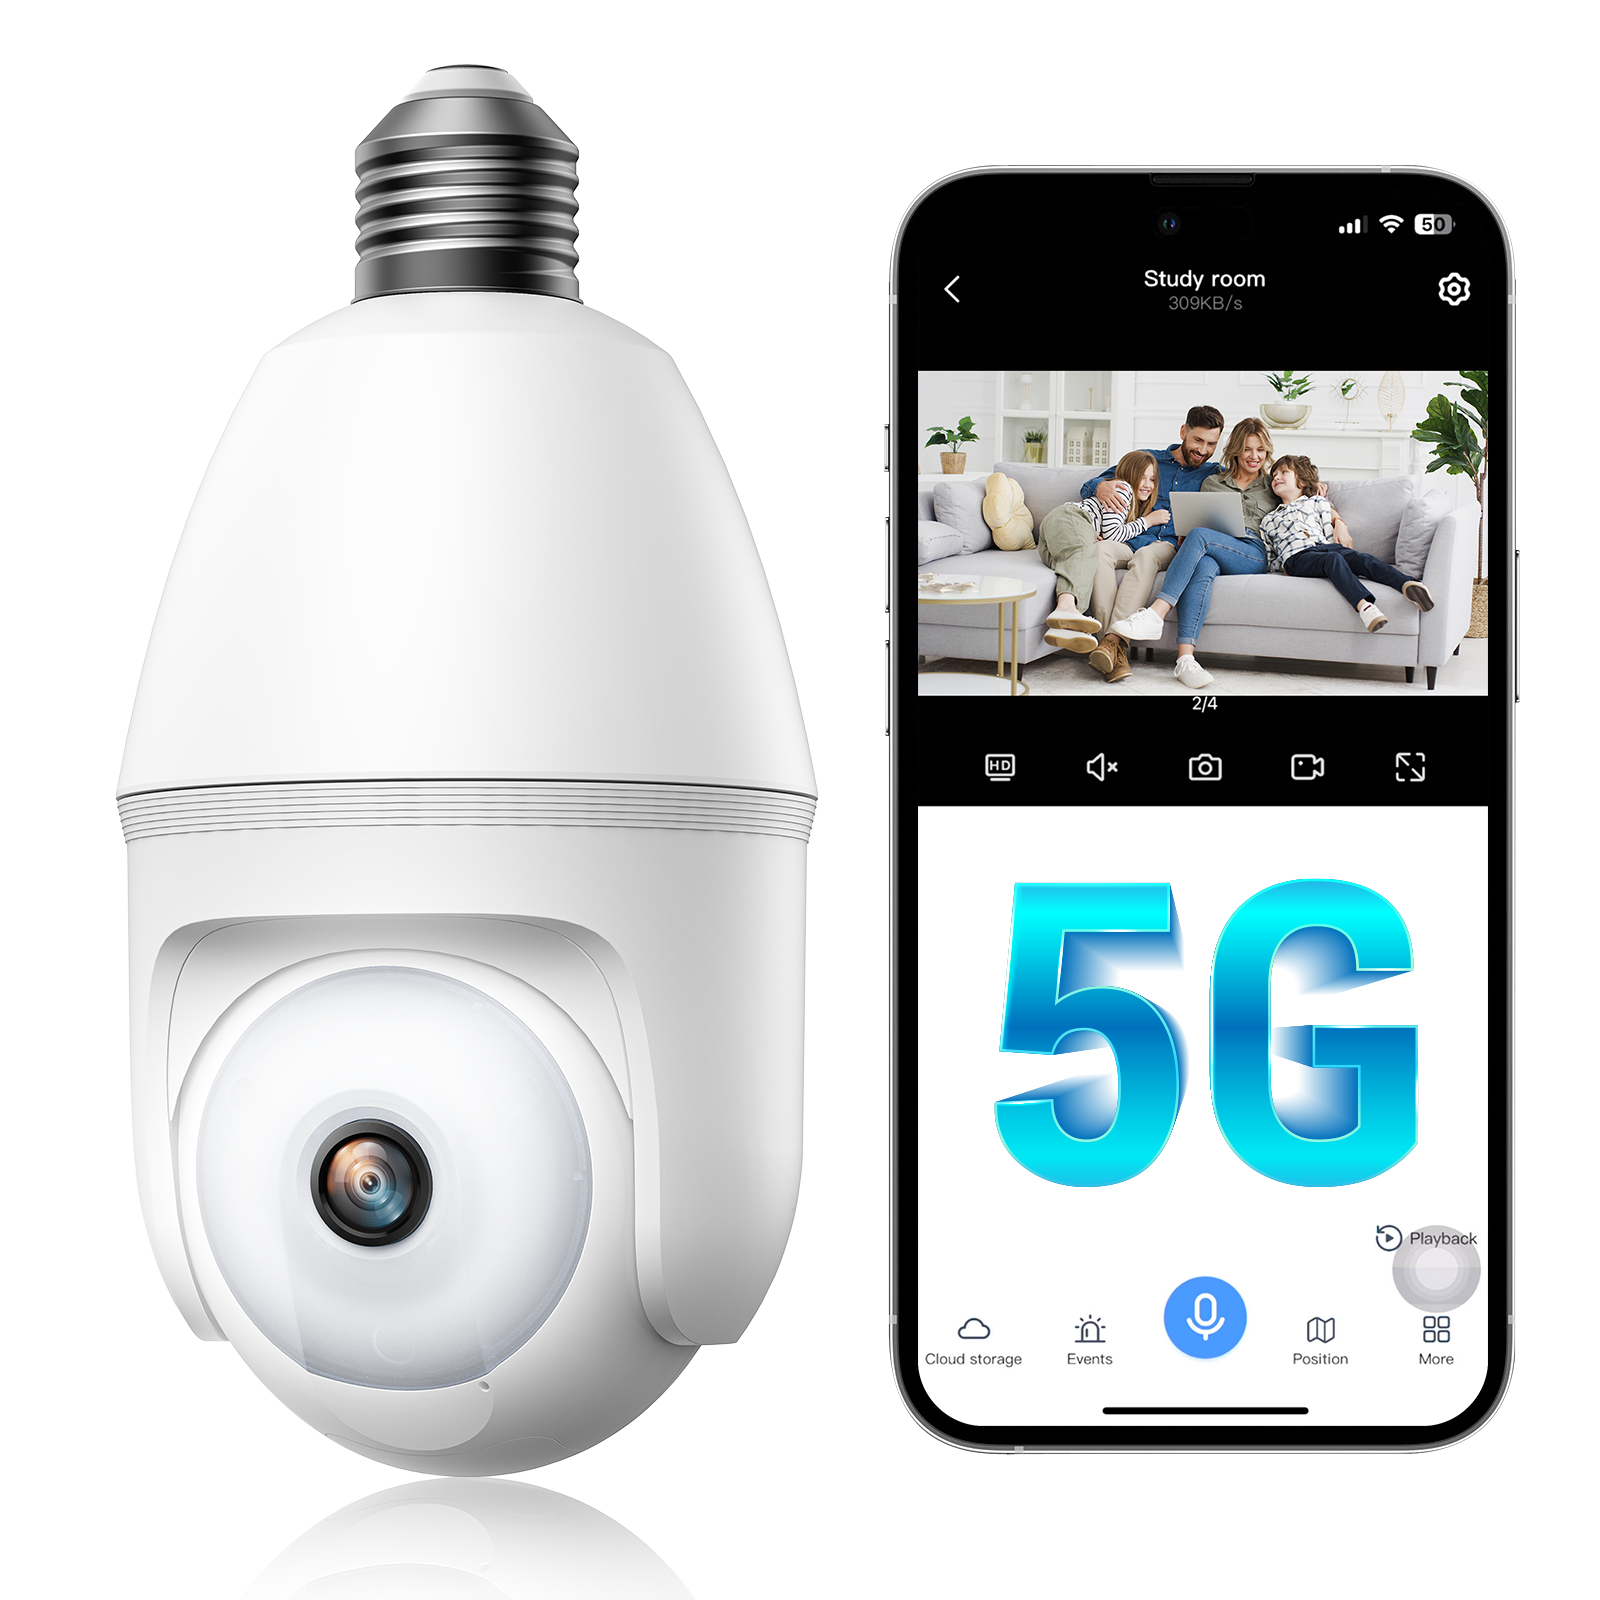  1080P 2MP WiFi Security Camera for Home Outdoor Bulb Camera Support 2.4G/5G WiFi, Motion Detection and Siren Alarm